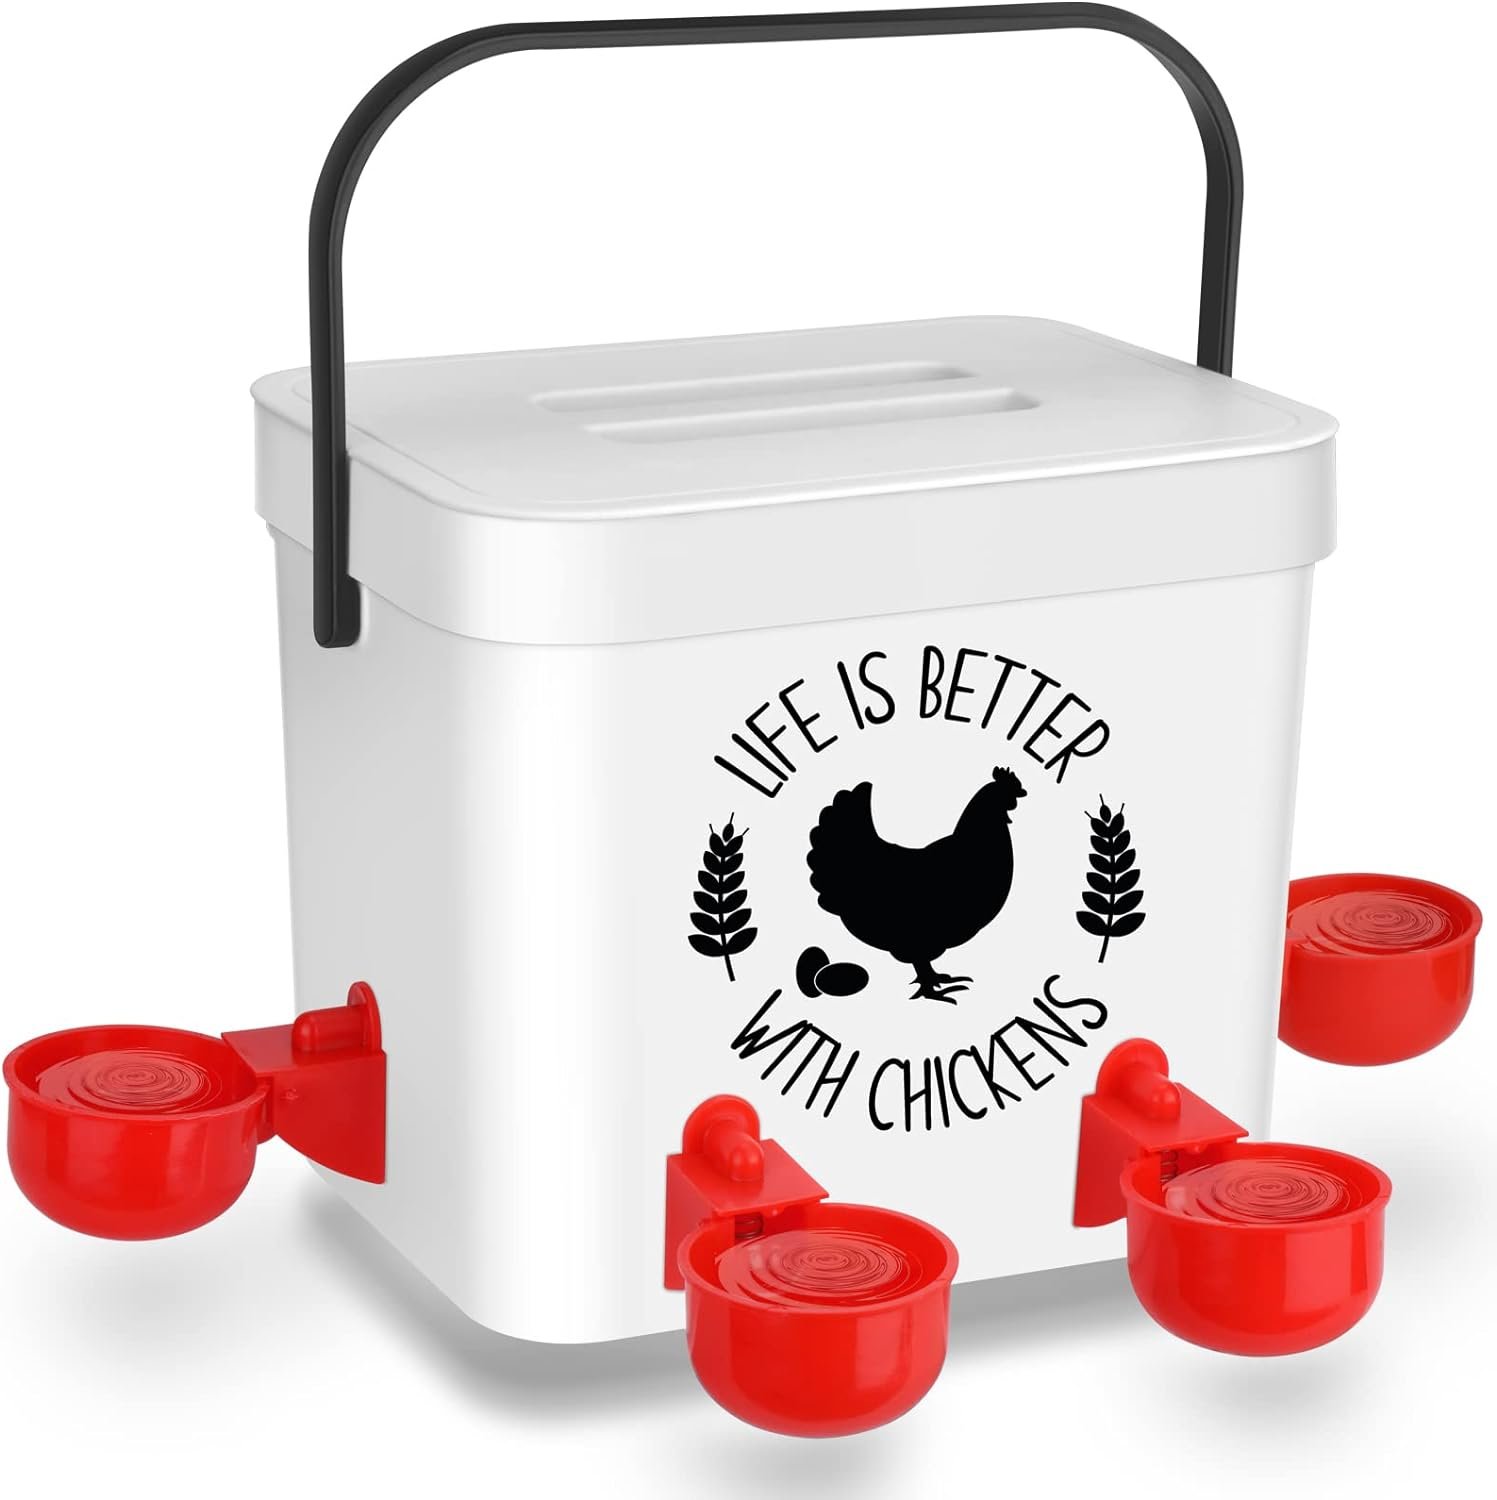 ‎Tgeyd Chicken Feeder and Chicken Waterer Set - Hanging Automatic Chicken Feeder No Waste - Chicken Coop Accessories - Poultry Waterer with 2 Gallon/10 Pounds